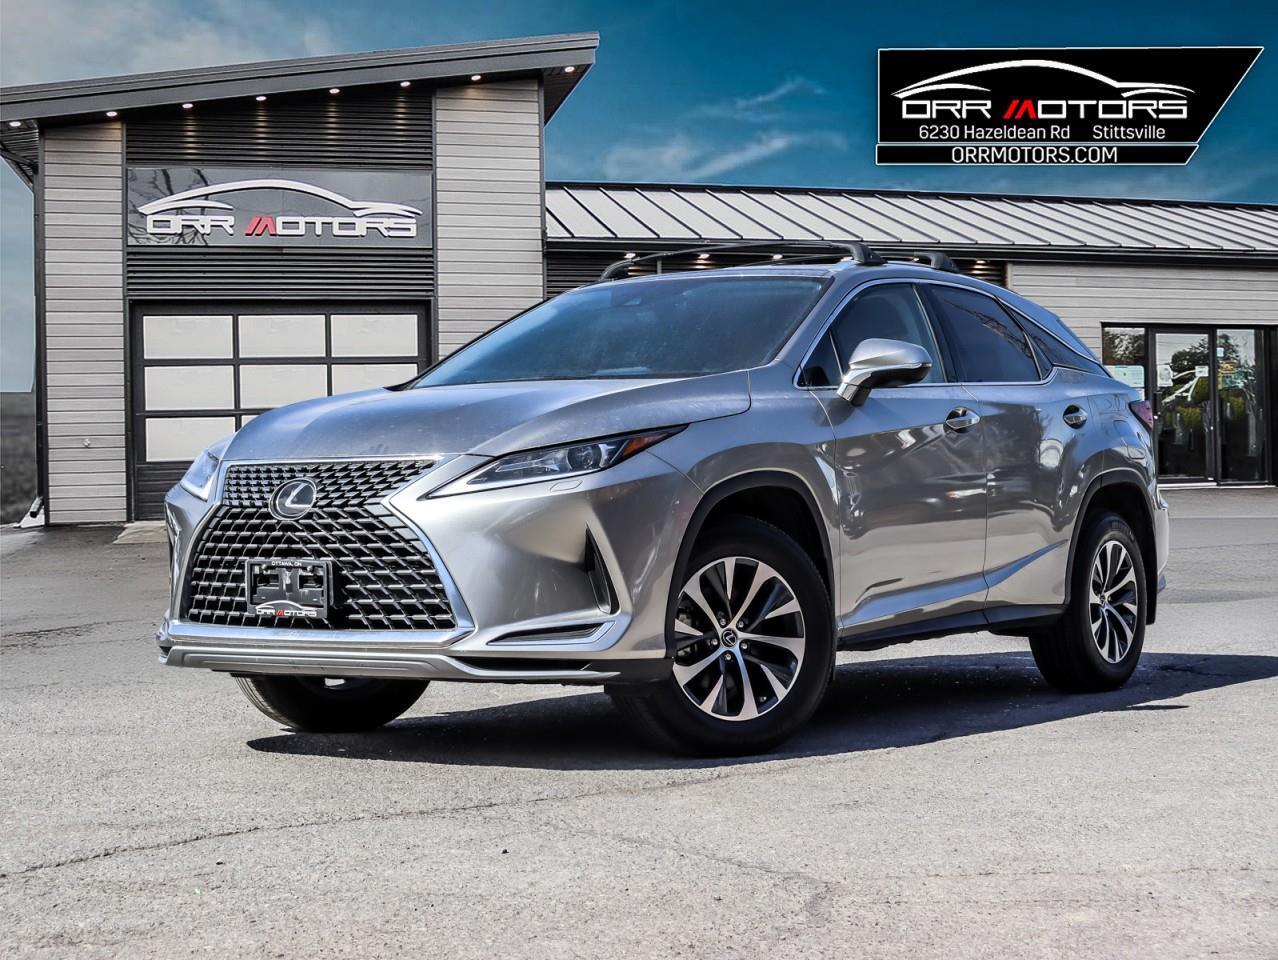 2021 Lexus RX 350 SOLD CERTIFIED AND IN EXCELLENT CONDITION!